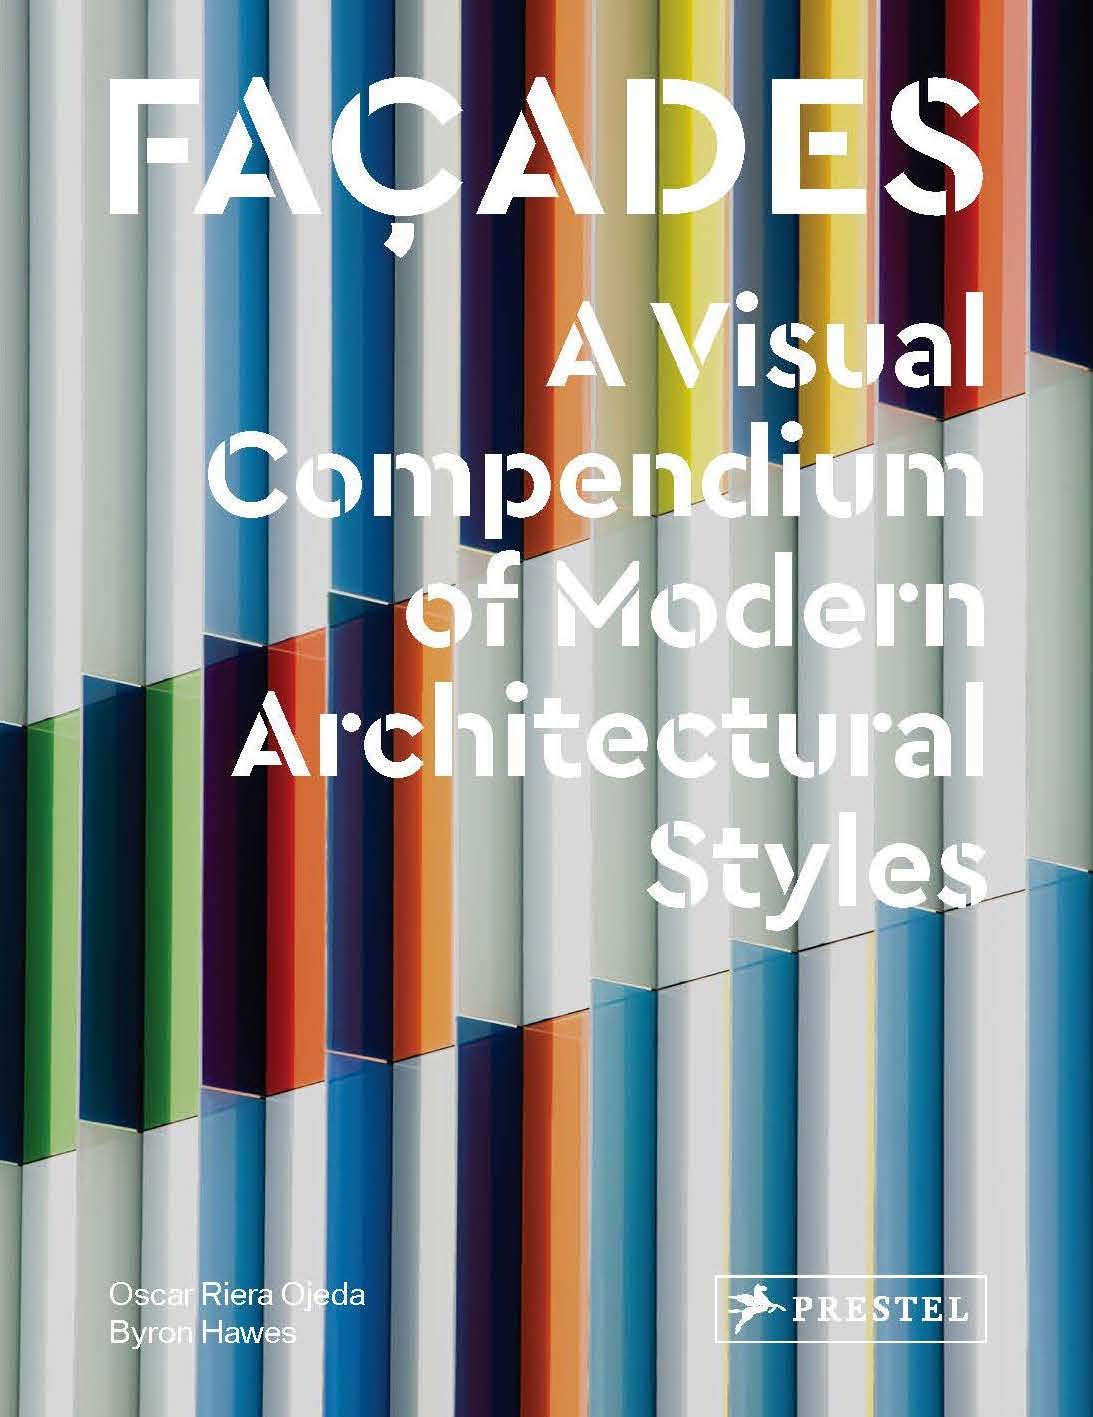 Facades. A Visual Compendium of Modern Architectural Styles